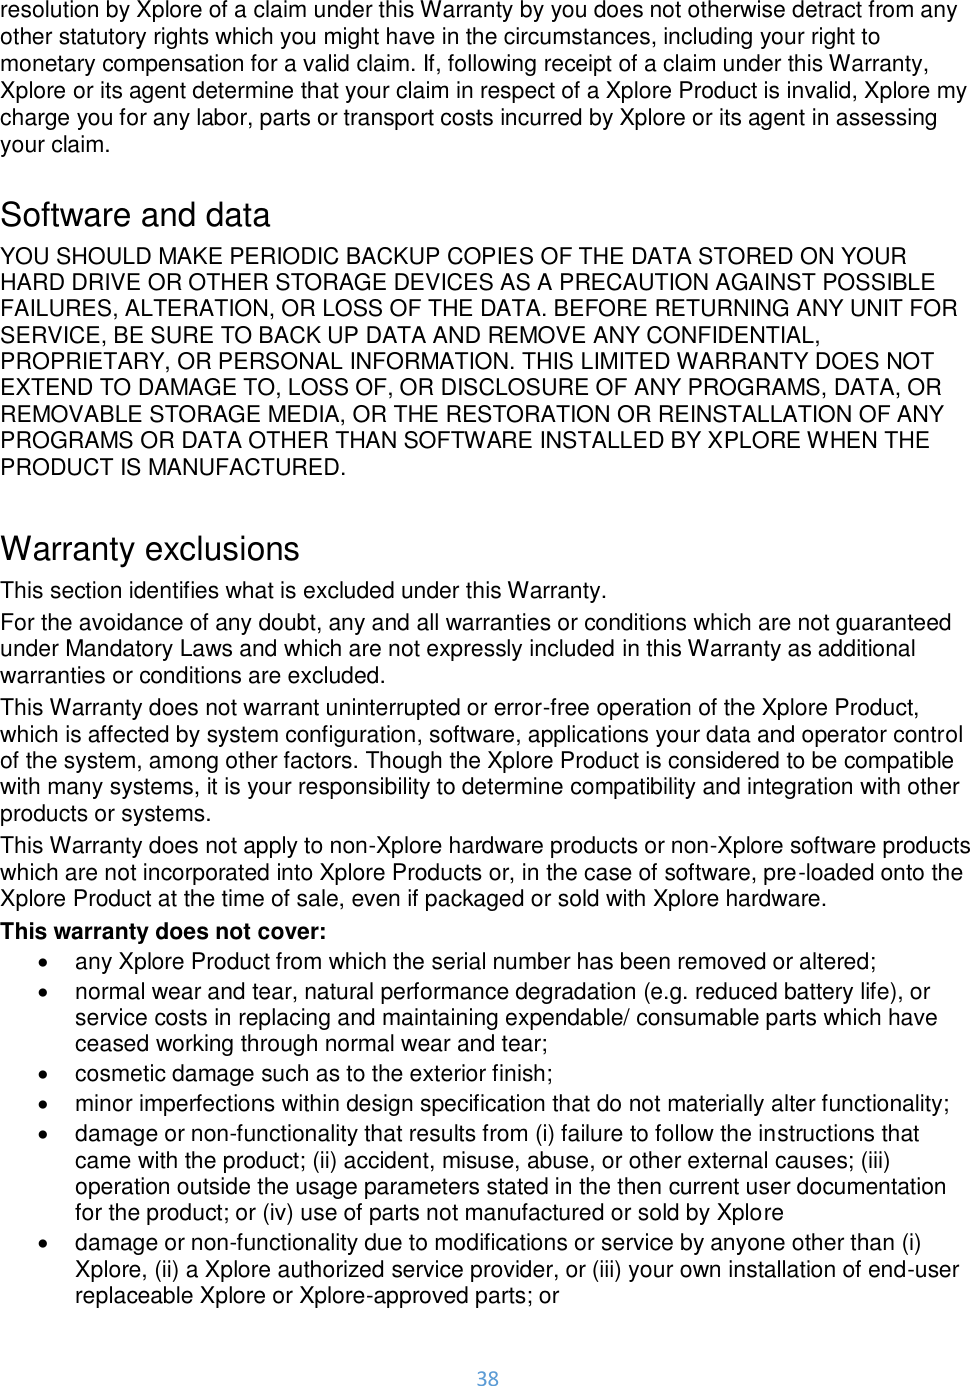 38  resolution by Xplore of a claim under this Warranty by you does not otherwise detract from any other statutory rights which you might have in the circumstances, including your right to monetary compensation for a valid claim. If, following receipt of a claim under this Warranty, Xplore or its agent determine that your claim in respect of a Xplore Product is invalid, Xplore my charge you for any labor, parts or transport costs incurred by Xplore or its agent in assessing your claim.  Software and data YOU SHOULD MAKE PERIODIC BACKUP COPIES OF THE DATA STORED ON YOUR HARD DRIVE OR OTHER STORAGE DEVICES AS A PRECAUTION AGAINST POSSIBLE FAILURES, ALTERATION, OR LOSS OF THE DATA. BEFORE RETURNING ANY UNIT FOR SERVICE, BE SURE TO BACK UP DATA AND REMOVE ANY CONFIDENTIAL, PROPRIETARY, OR PERSONAL INFORMATION. THIS LIMITED WARRANTY DOES NOT EXTEND TO DAMAGE TO, LOSS OF, OR DISCLOSURE OF ANY PROGRAMS, DATA, OR REMOVABLE STORAGE MEDIA, OR THE RESTORATION OR REINSTALLATION OF ANY PROGRAMS OR DATA OTHER THAN SOFTWARE INSTALLED BY XPLORE WHEN THE PRODUCT IS MANUFACTURED.  Warranty exclusions This section identifies what is excluded under this Warranty. For the avoidance of any doubt, any and all warranties or conditions which are not guaranteed under Mandatory Laws and which are not expressly included in this Warranty as additional warranties or conditions are excluded. This Warranty does not warrant uninterrupted or error-free operation of the Xplore Product, which is affected by system configuration, software, applications your data and operator control of the system, among other factors. Though the Xplore Product is considered to be compatible with many systems, it is your responsibility to determine compatibility and integration with other products or systems. This Warranty does not apply to non-Xplore hardware products or non-Xplore software products which are not incorporated into Xplore Products or, in the case of software, pre-loaded onto the Xplore Product at the time of sale, even if packaged or sold with Xplore hardware. This warranty does not cover: •  any Xplore Product from which the serial number has been removed or altered; •  normal wear and tear, natural performance degradation (e.g. reduced battery life), or service costs in replacing and maintaining expendable/ consumable parts which have ceased working through normal wear and tear; •  cosmetic damage such as to the exterior finish; •  minor imperfections within design specification that do not materially alter functionality; •  damage or non-functionality that results from (i) failure to follow the instructions that came with the product; (ii) accident, misuse, abuse, or other external causes; (iii) operation outside the usage parameters stated in the then current user documentation for the product; or (iv) use of parts not manufactured or sold by Xplore •  damage or non-functionality due to modifications or service by anyone other than (i) Xplore, (ii) a Xplore authorized service provider, or (iii) your own installation of end-user replaceable Xplore or Xplore-approved parts; or 